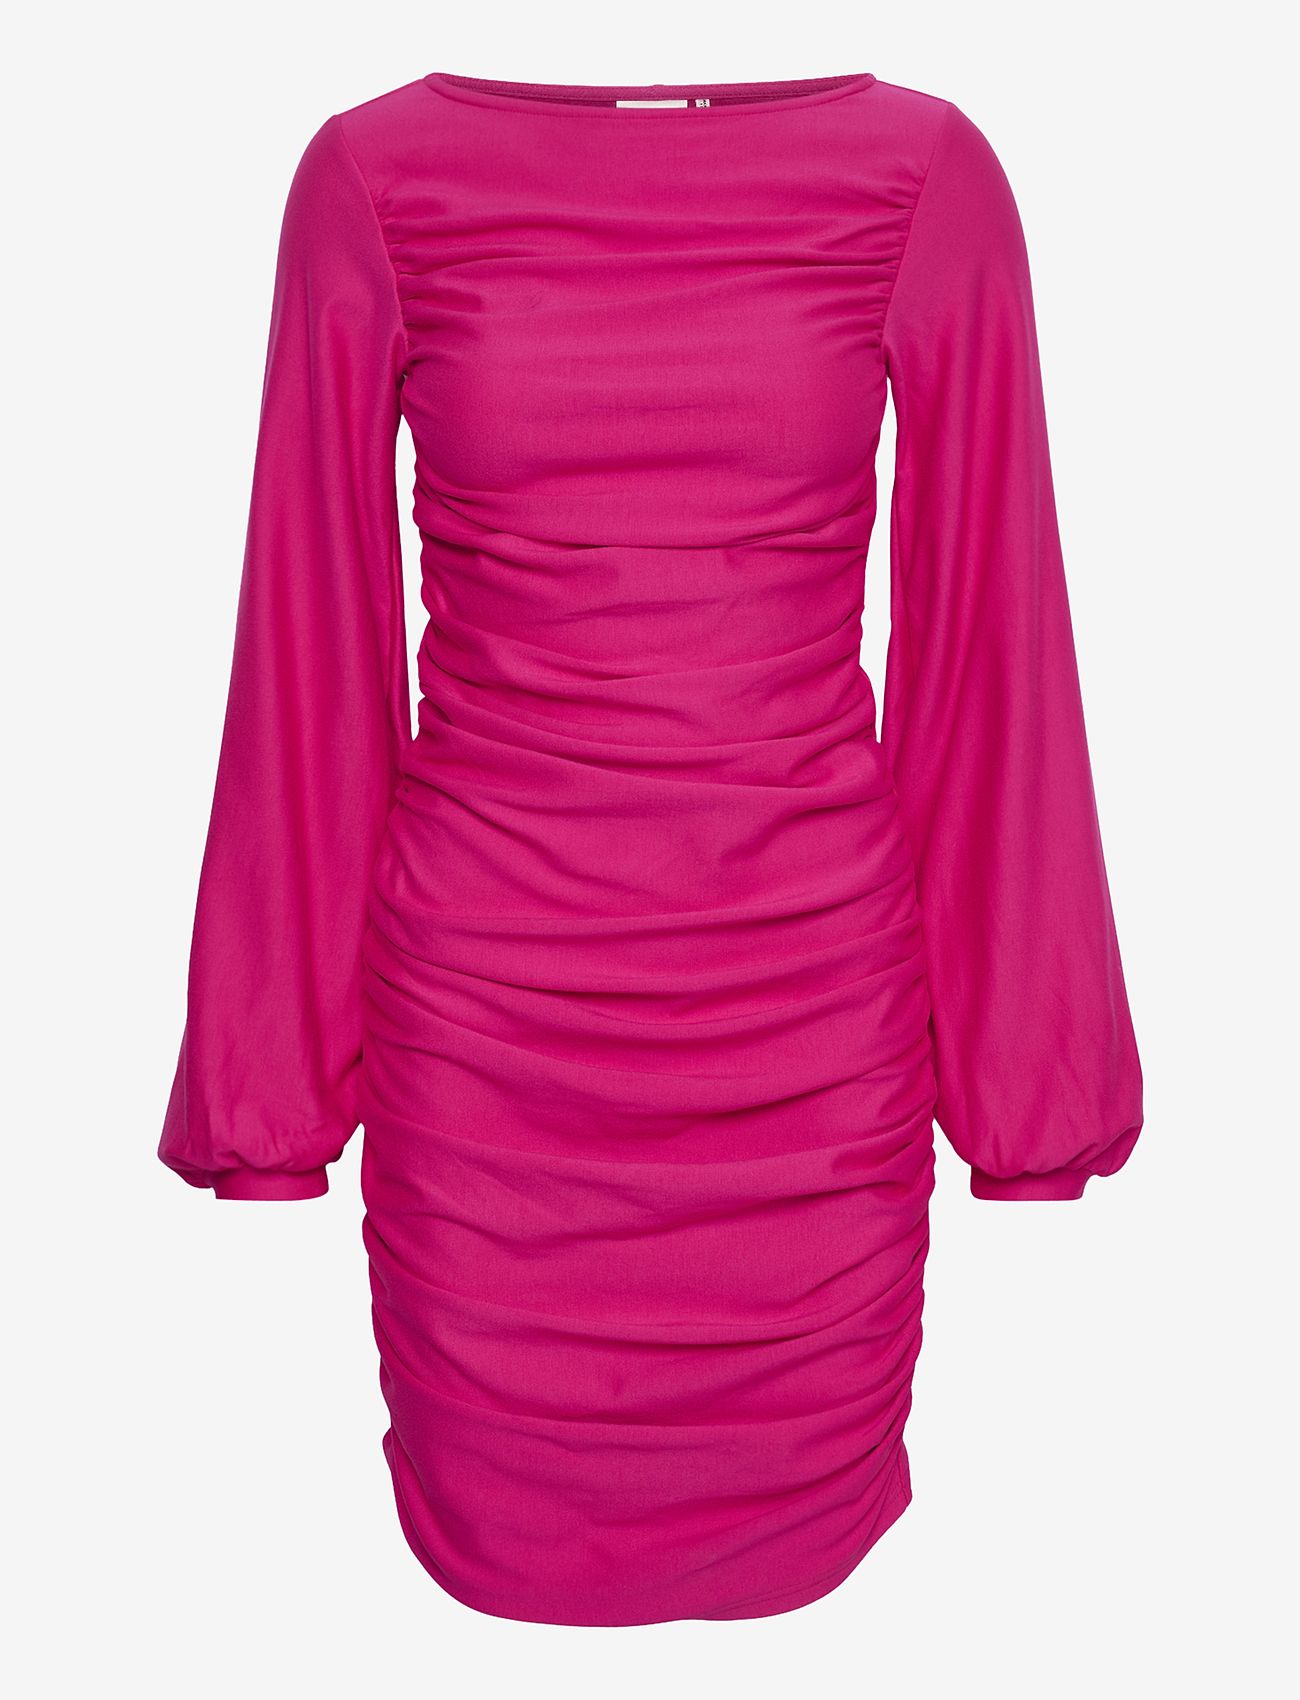 Gestuz - RifaGZ ls dress - party wear at outlet prices - pink peacock - 0